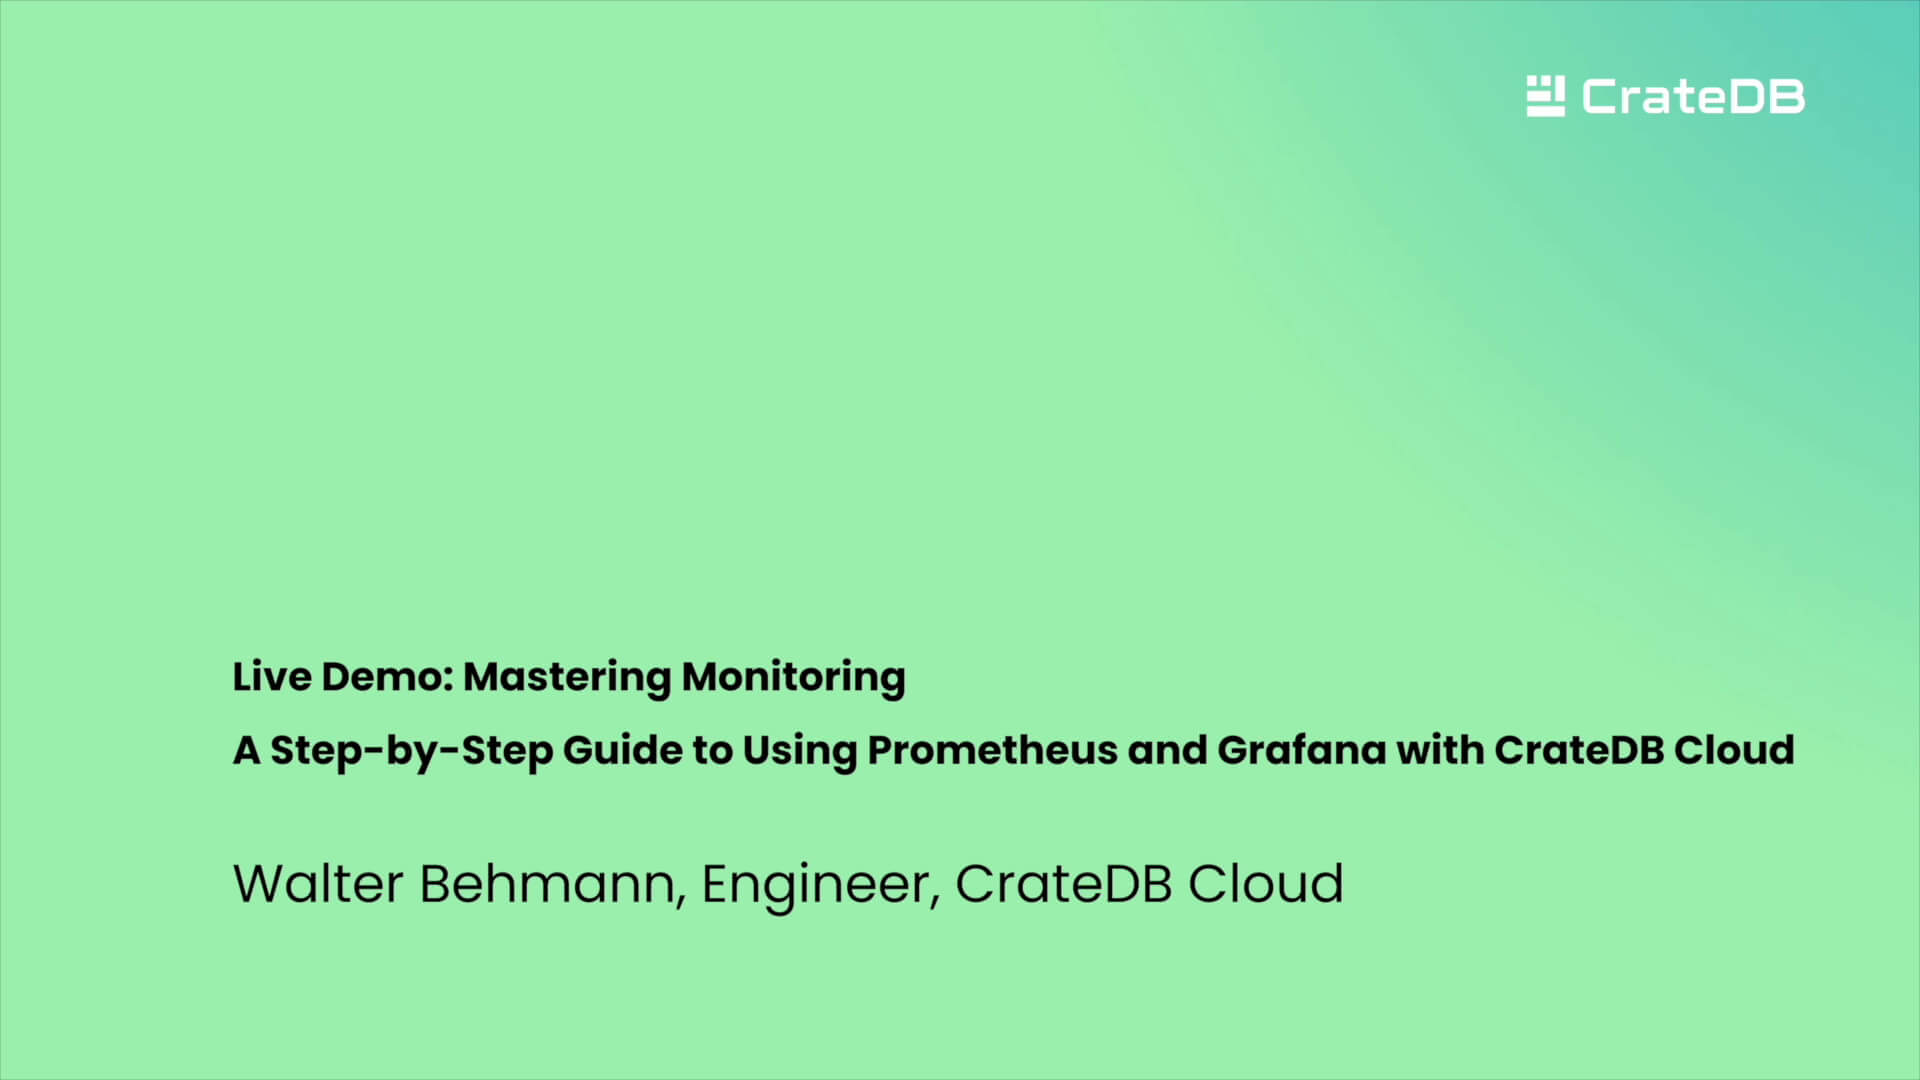 Mastering Monitoring: A Step-by-Step Guide to Using Prometheus and Grafana with CrateDB Cloud